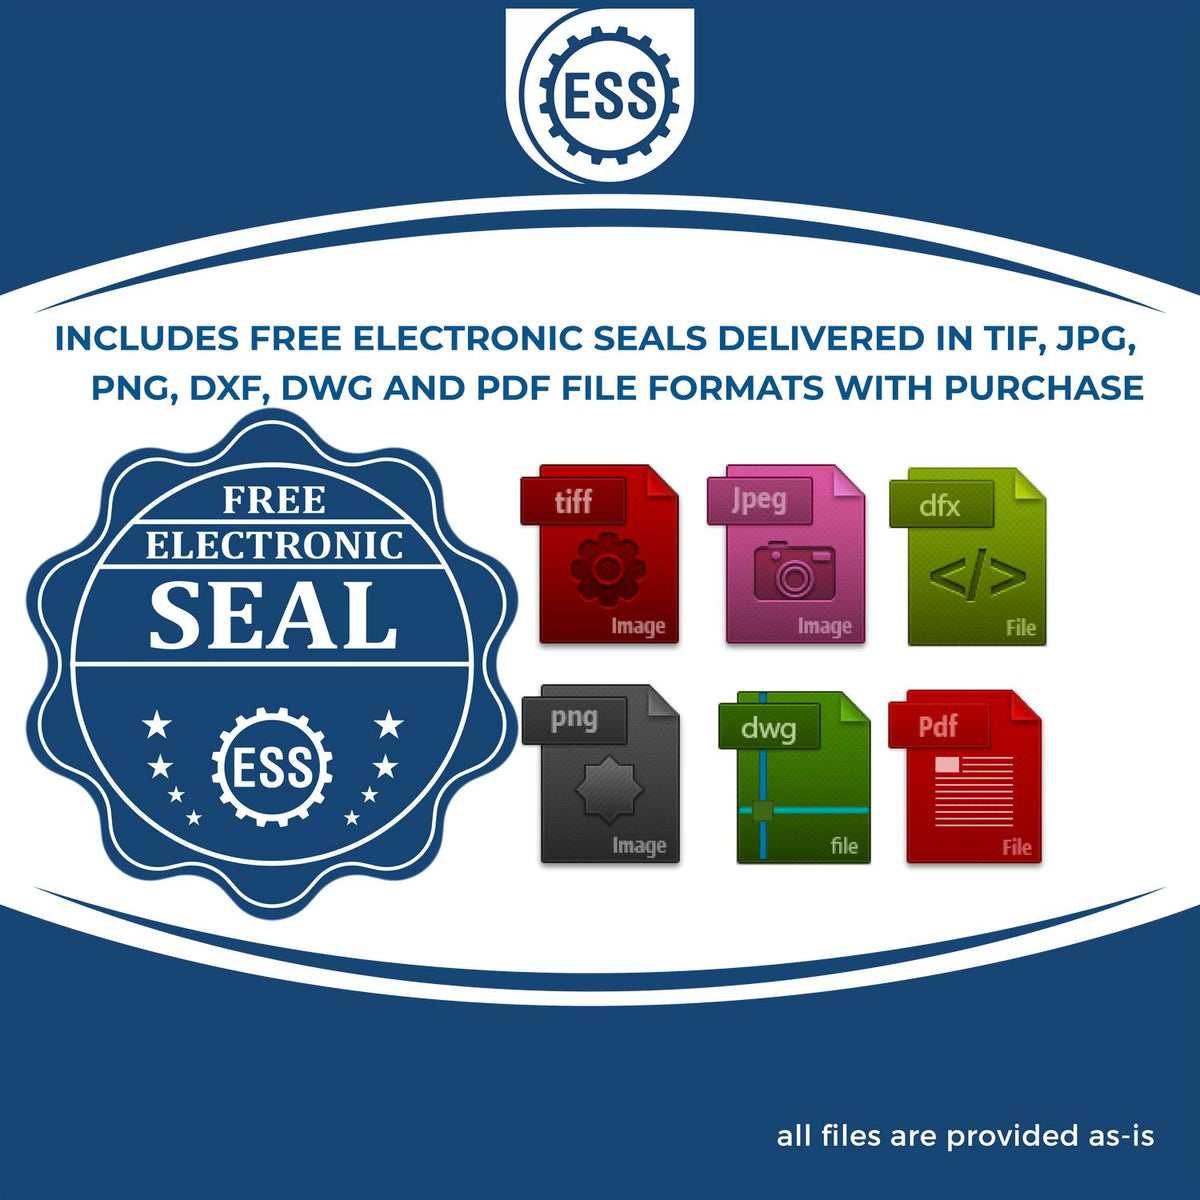 An infographic for the free electronic seal for the Soft Massachusetts Professional Geologist Seal illustrating the different file type icons such as DXF, DWG, TIF, JPG and PNG.